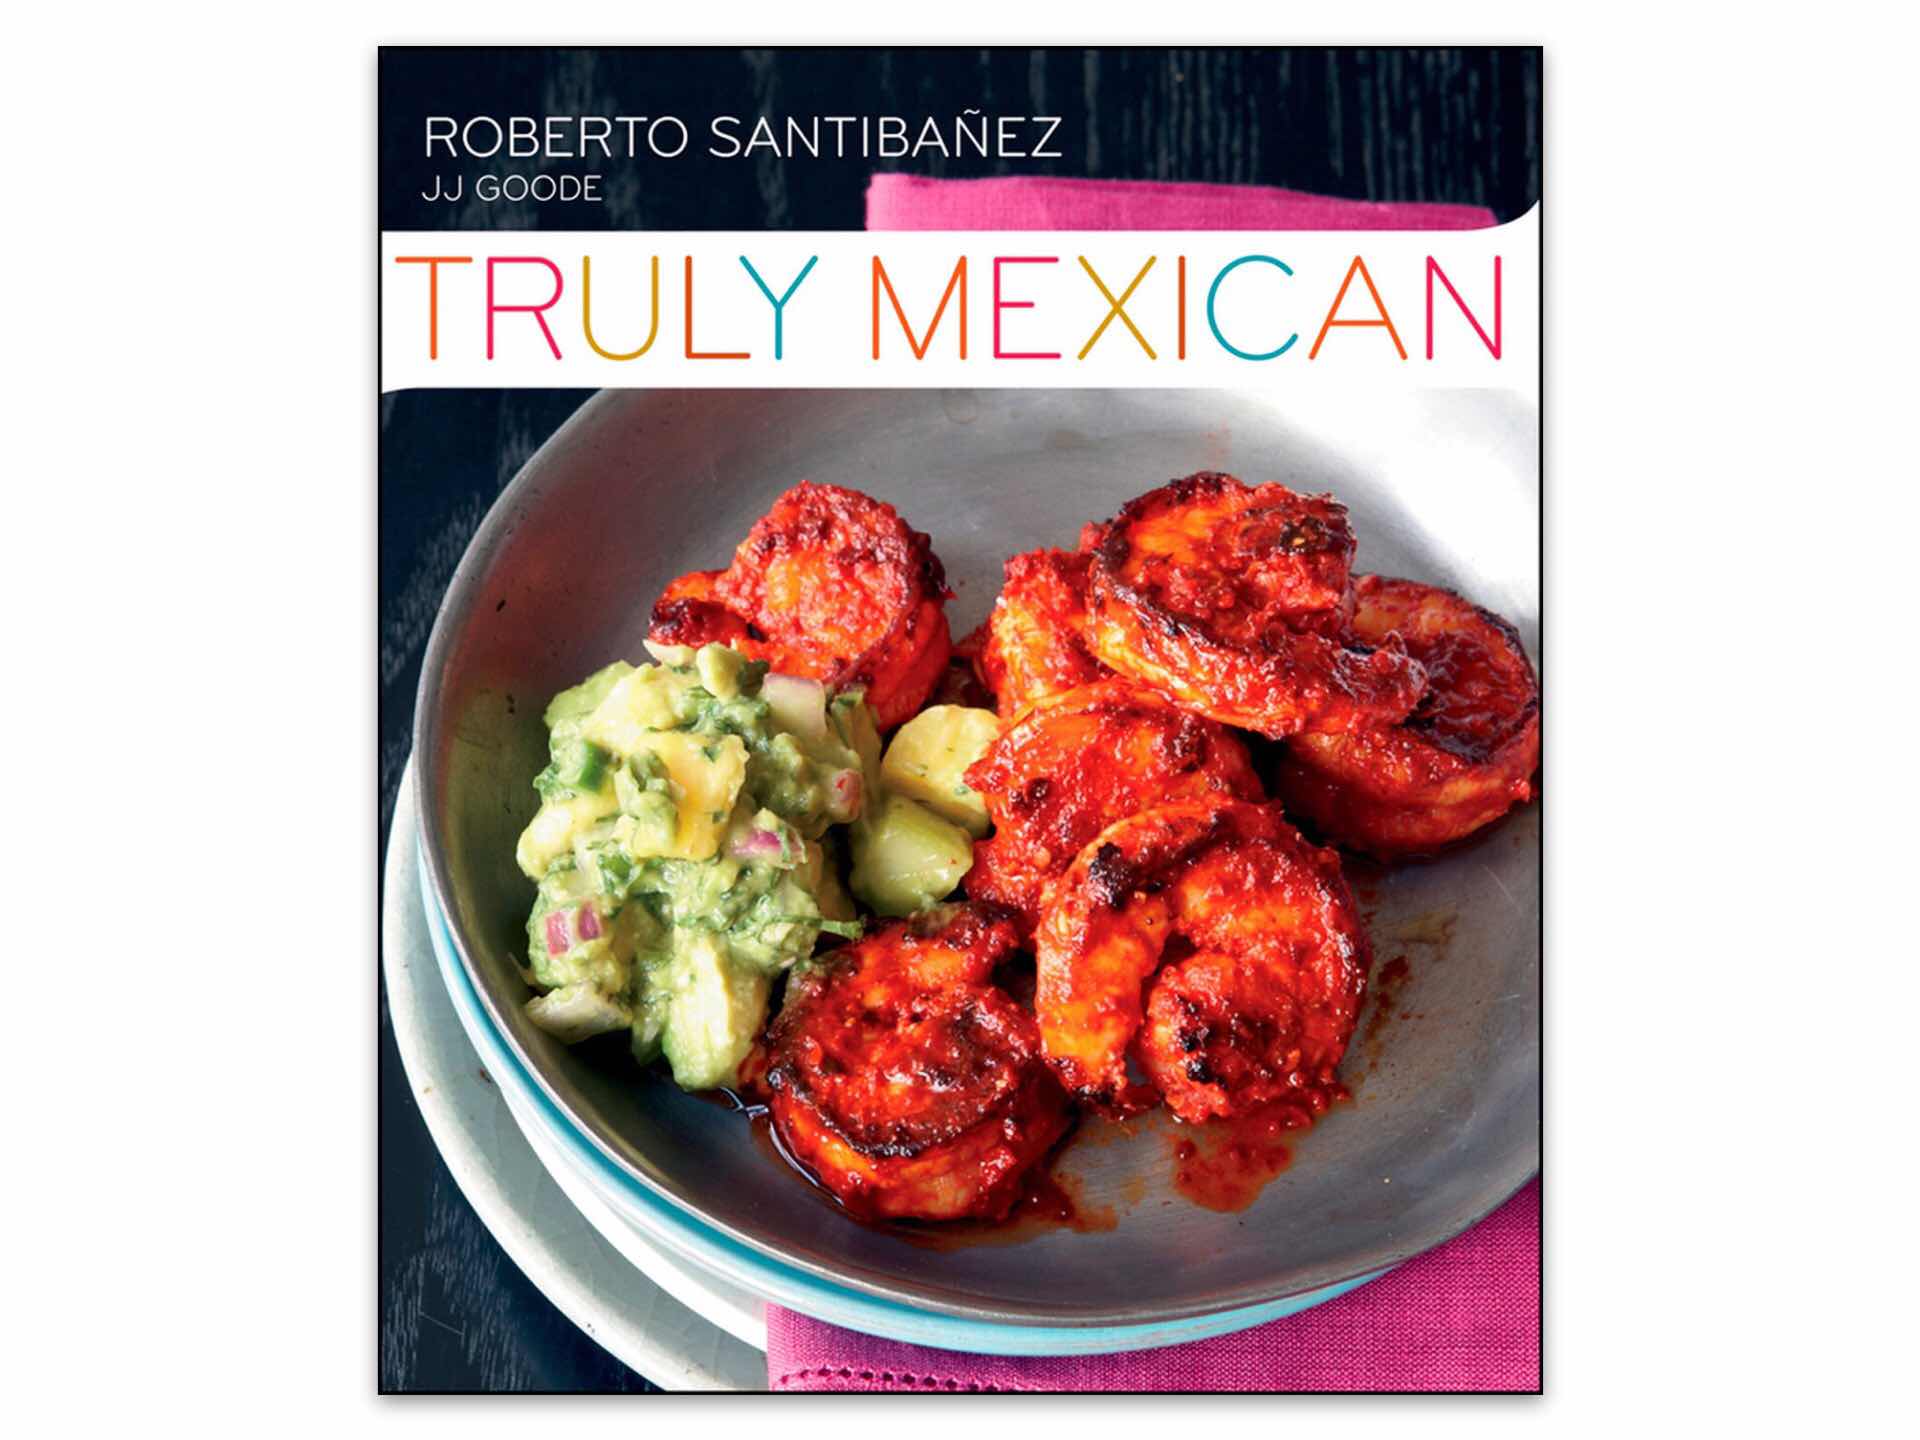 Truly Mexican by Roberto Santibañez and JJ Goode. ($25 hardcover)